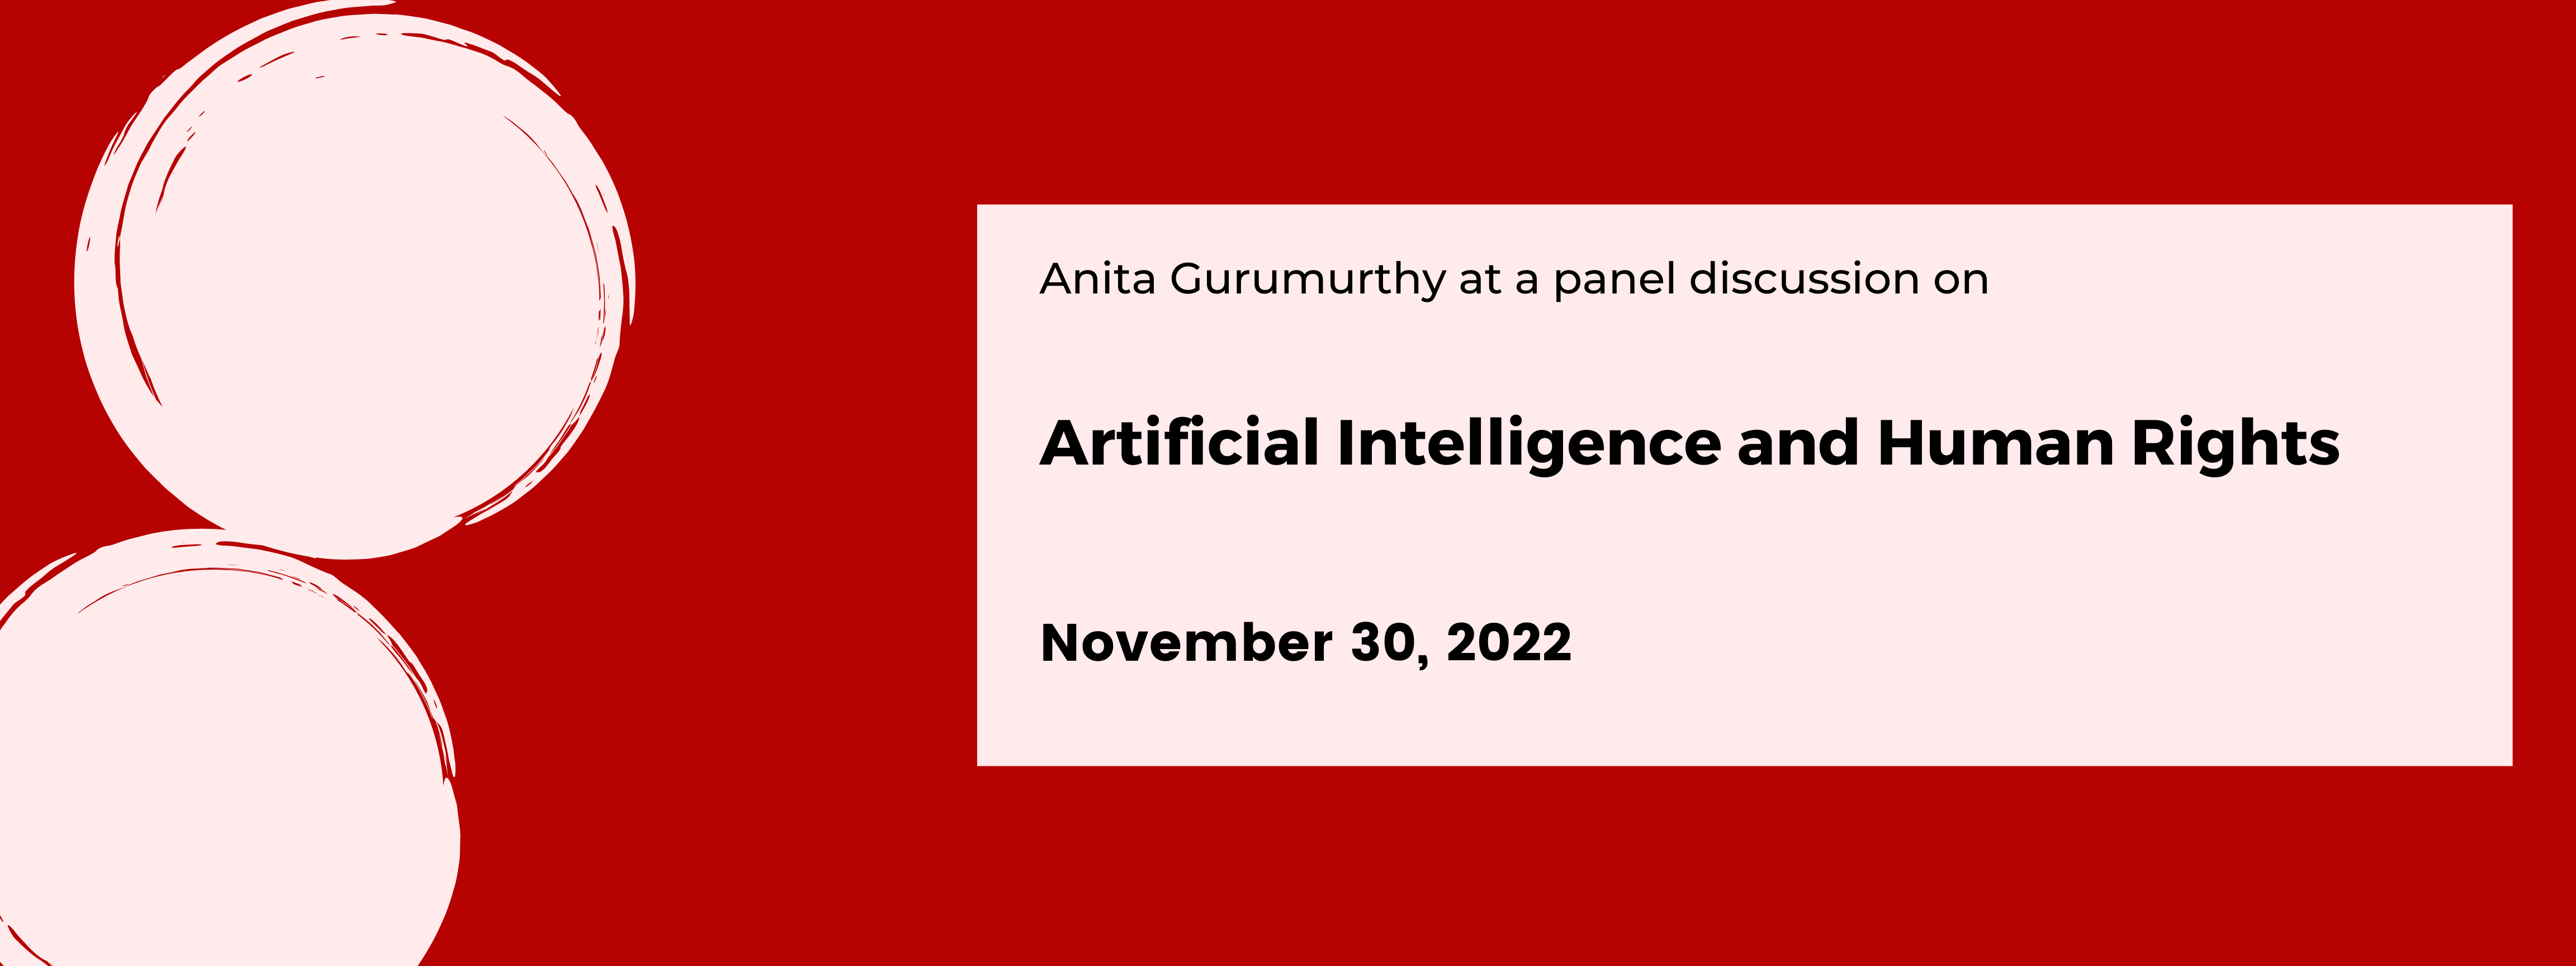 Artificial Intelligence and Human Rights